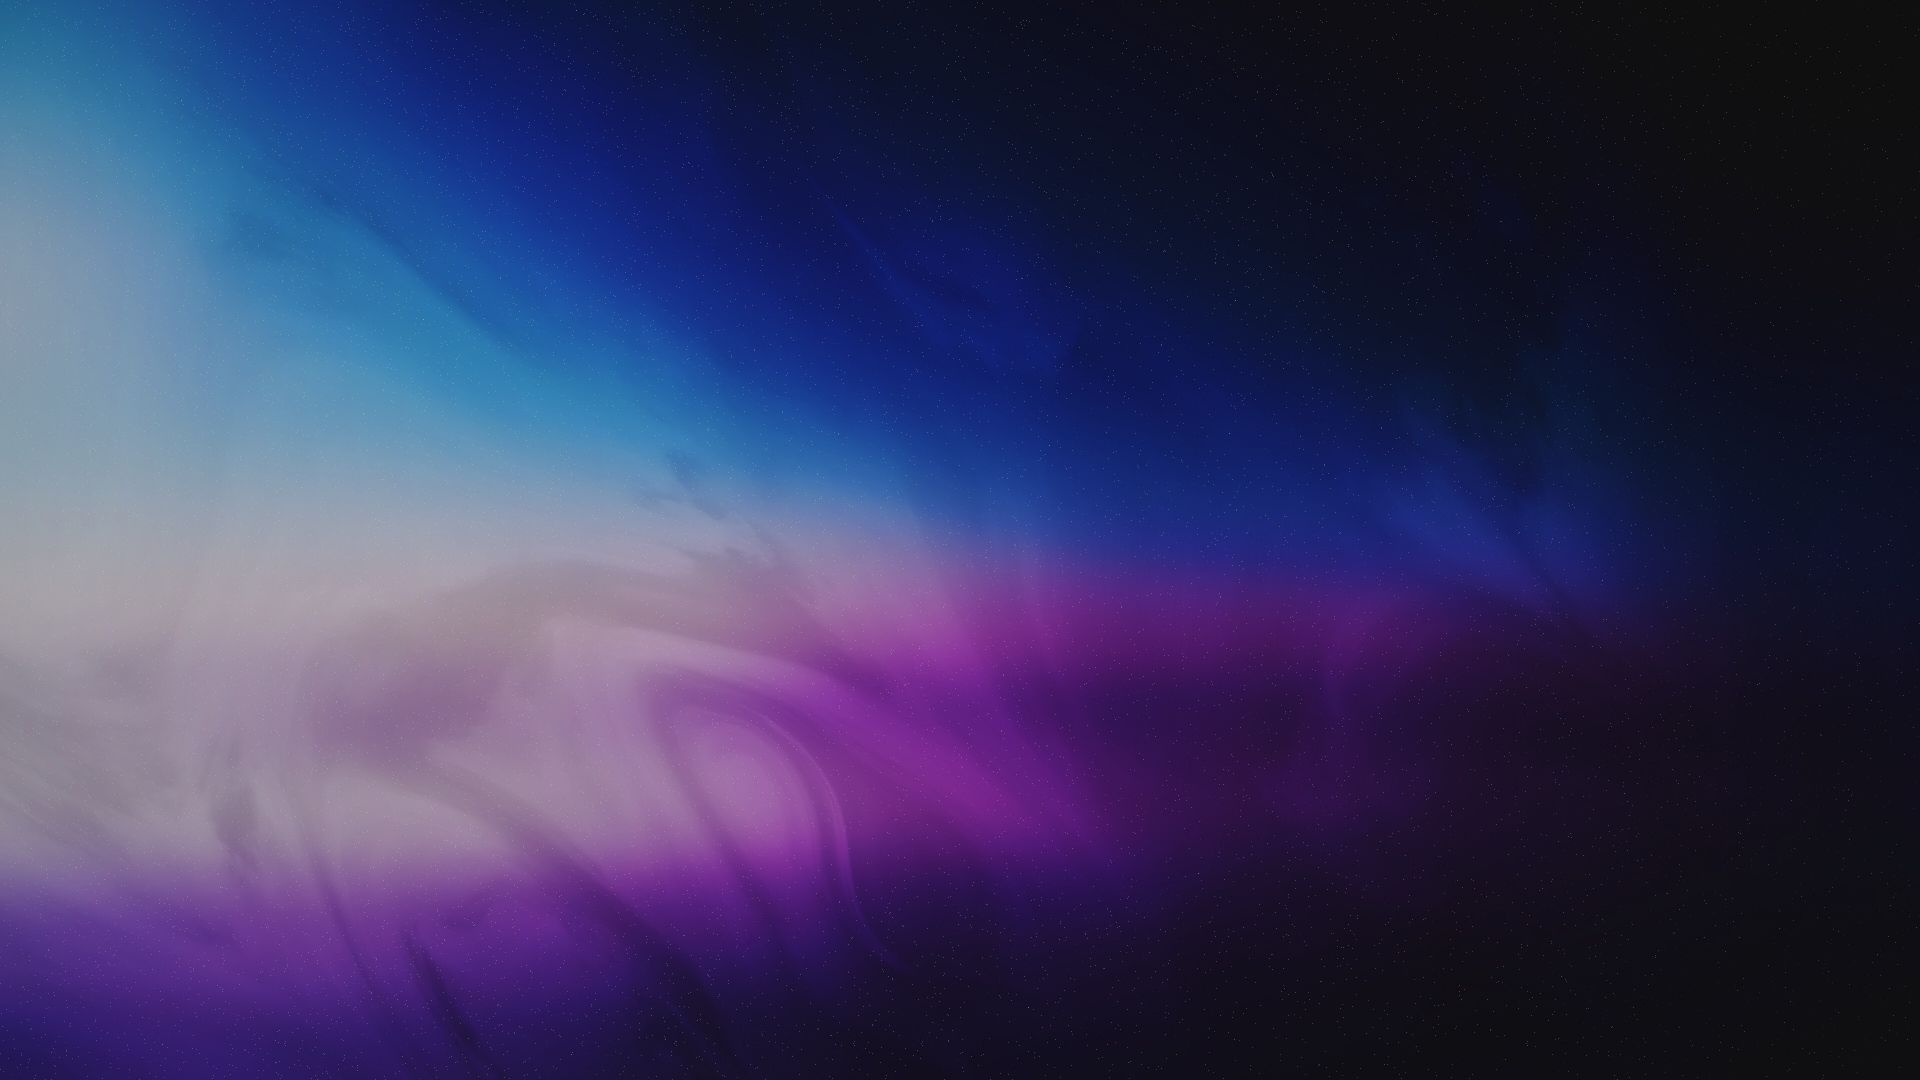 Desktop wallpaper dust, colorful, blue and purple gradient, abstract, HD image, picture, background, 381a6e